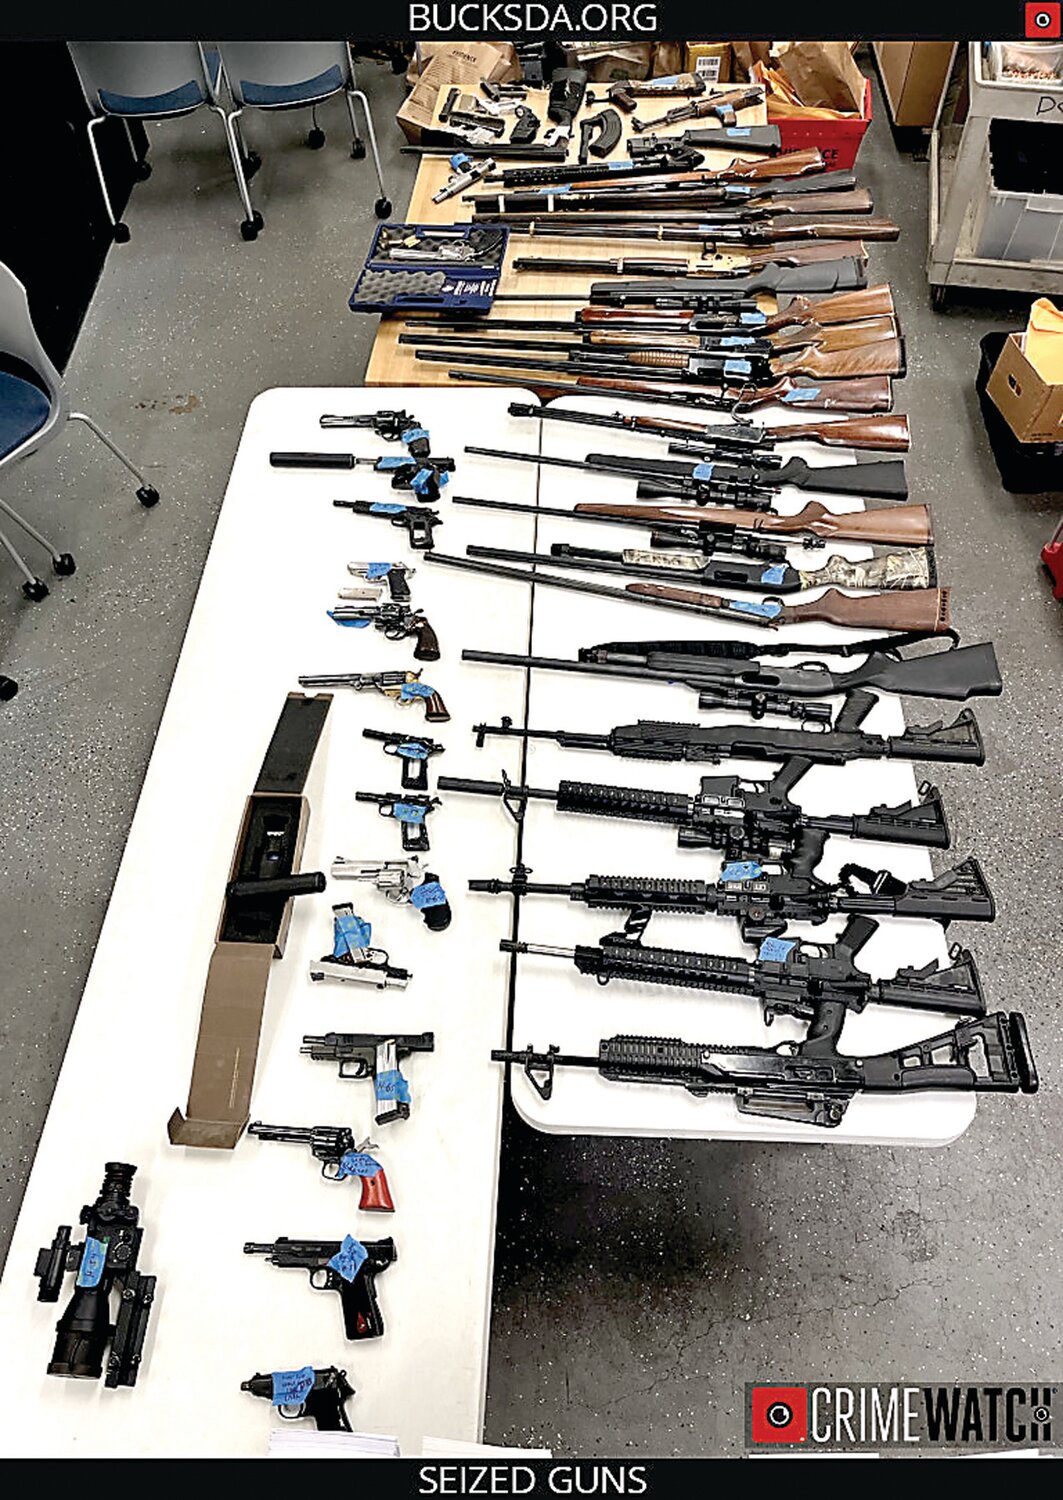 More than 40 firearms, including handguns, shotguns, hunting rifles and assault rifles equipped with suppressors were seized as a result of the investigation into a bi-coastal drug trafficking organization.